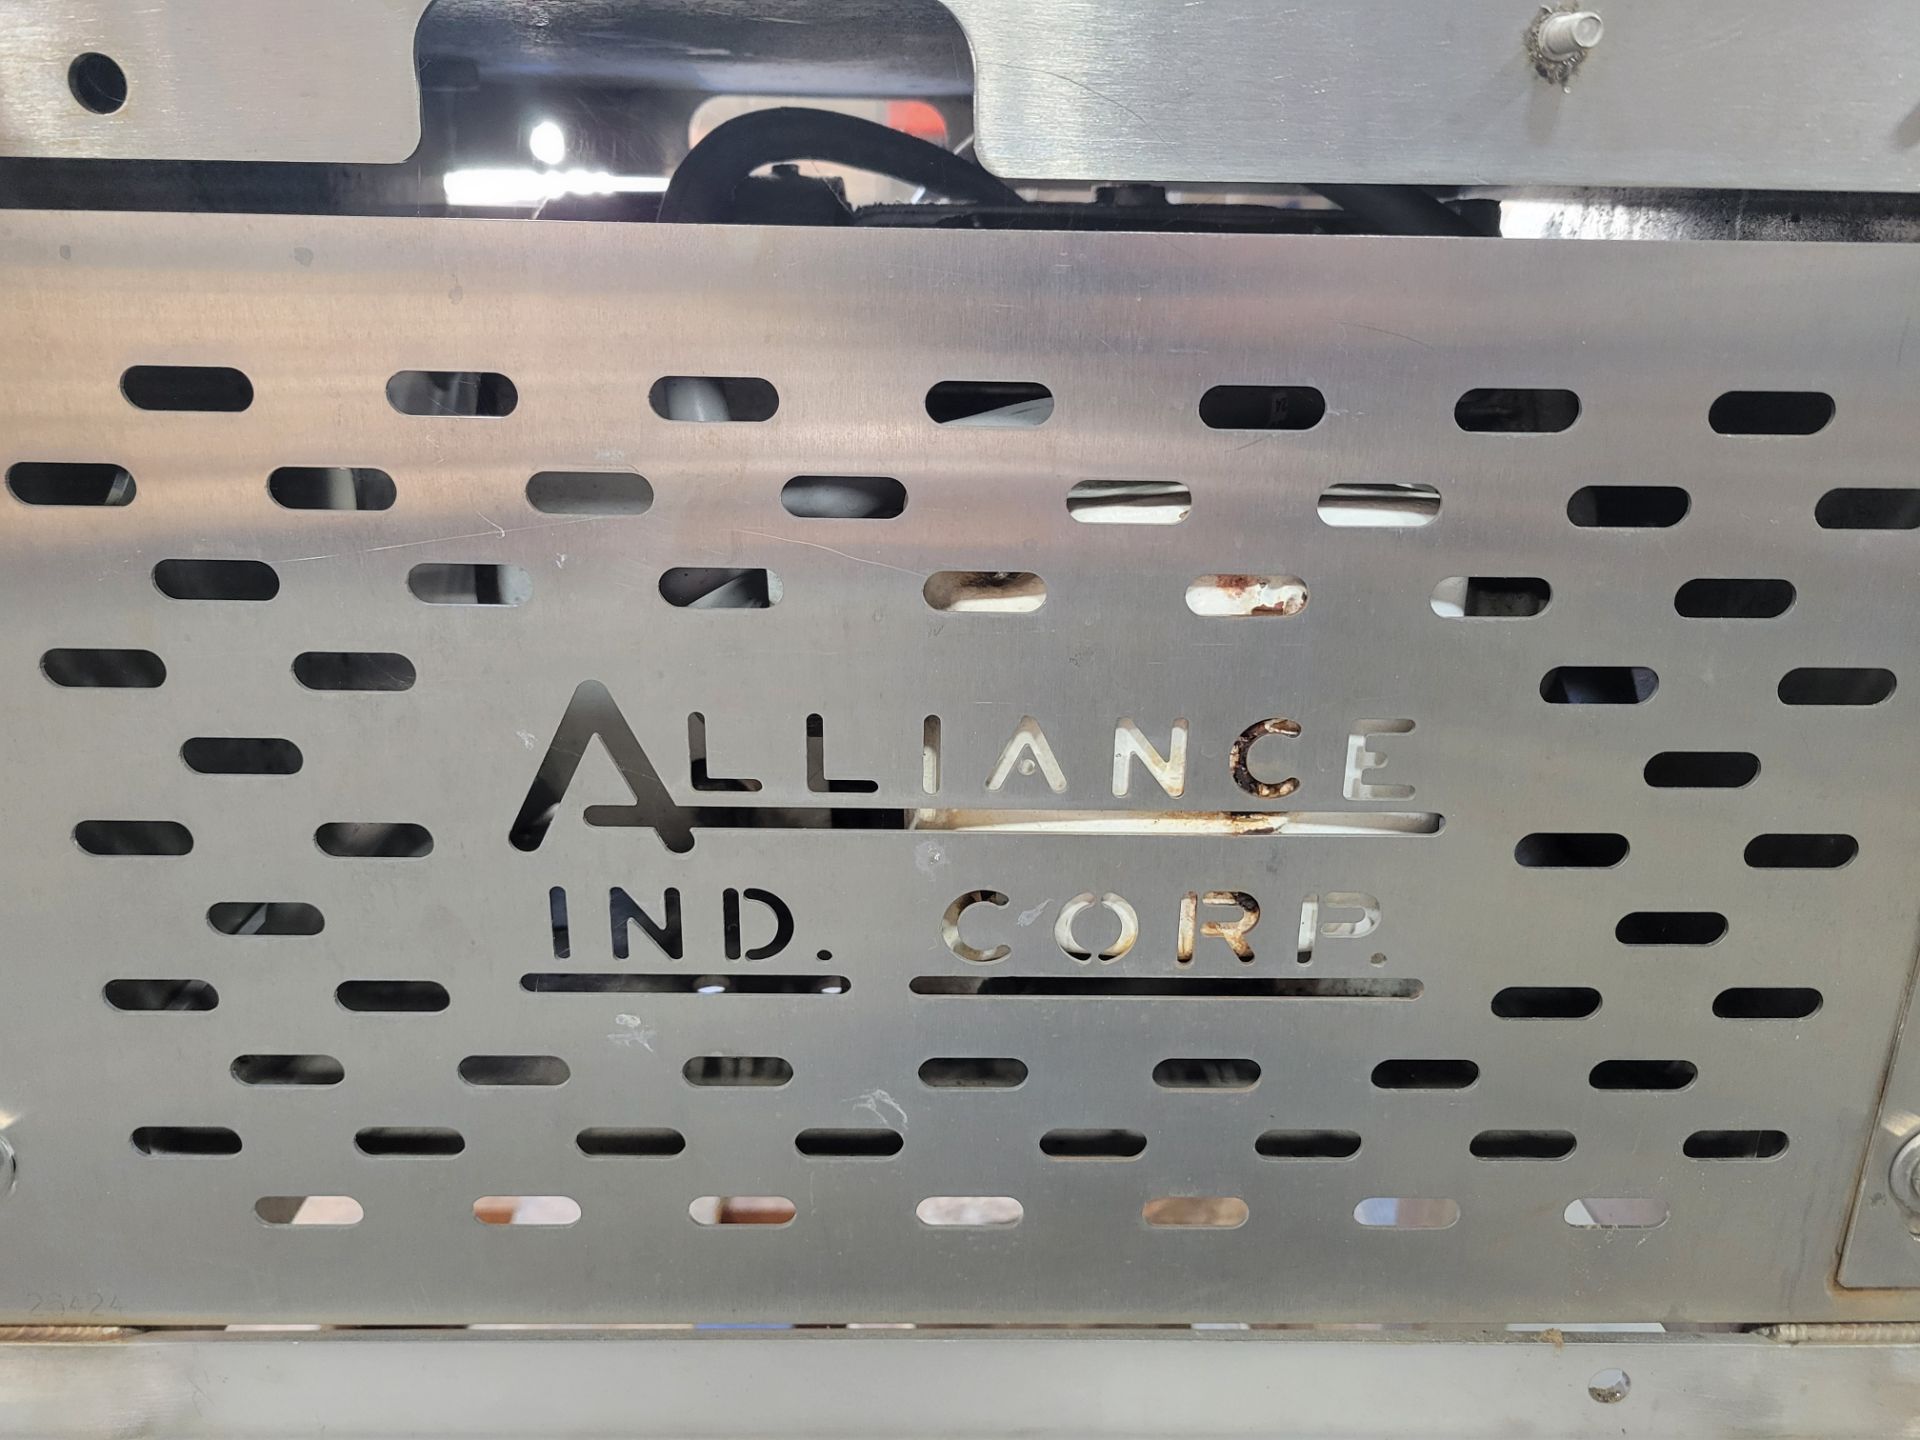 Alliance Ind. Corp Blower - Image 3 of 7